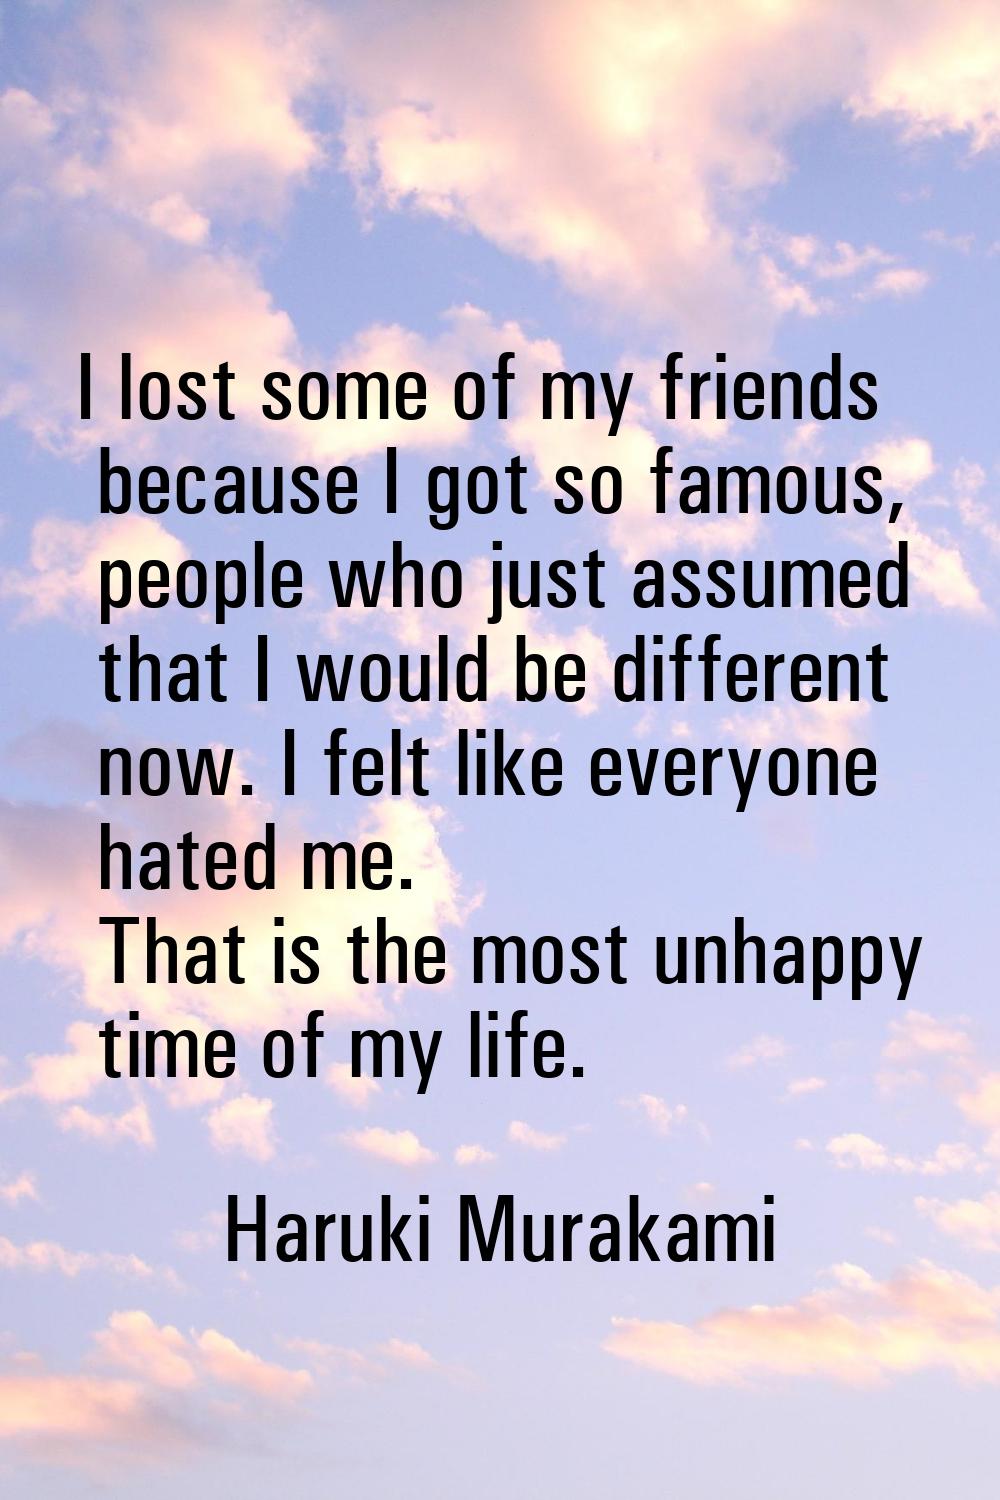 I lost some of my friends because I got so famous, people who just assumed that I would be differen